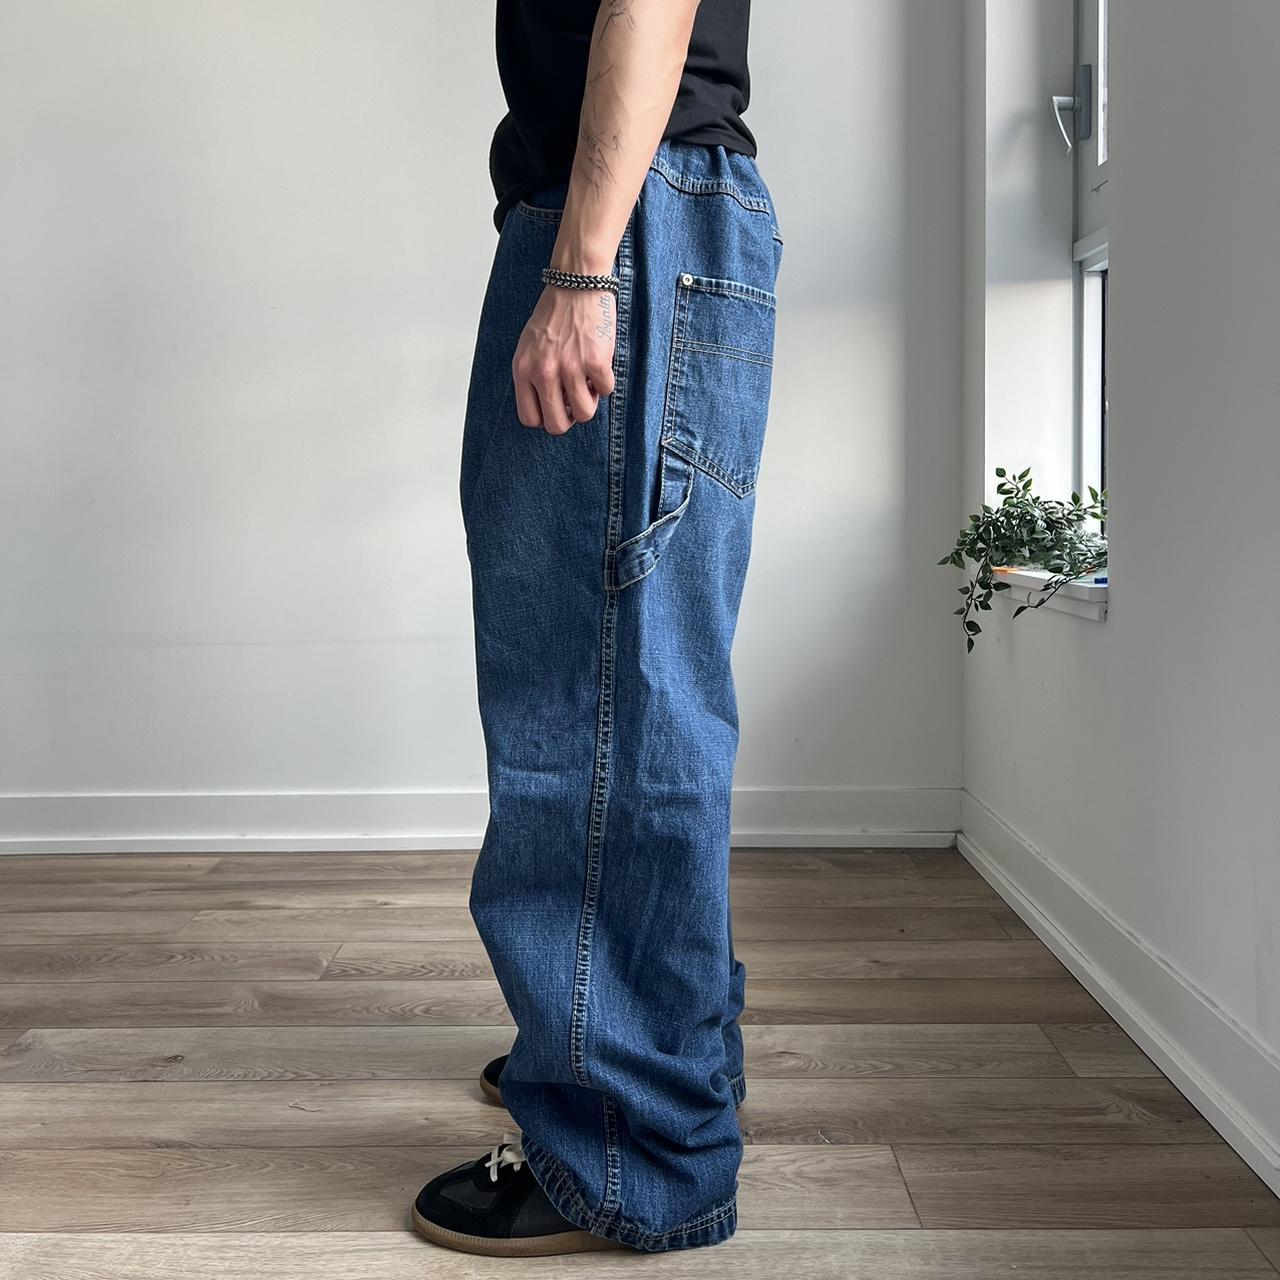 CYBER Y2K JNCO STYLE 